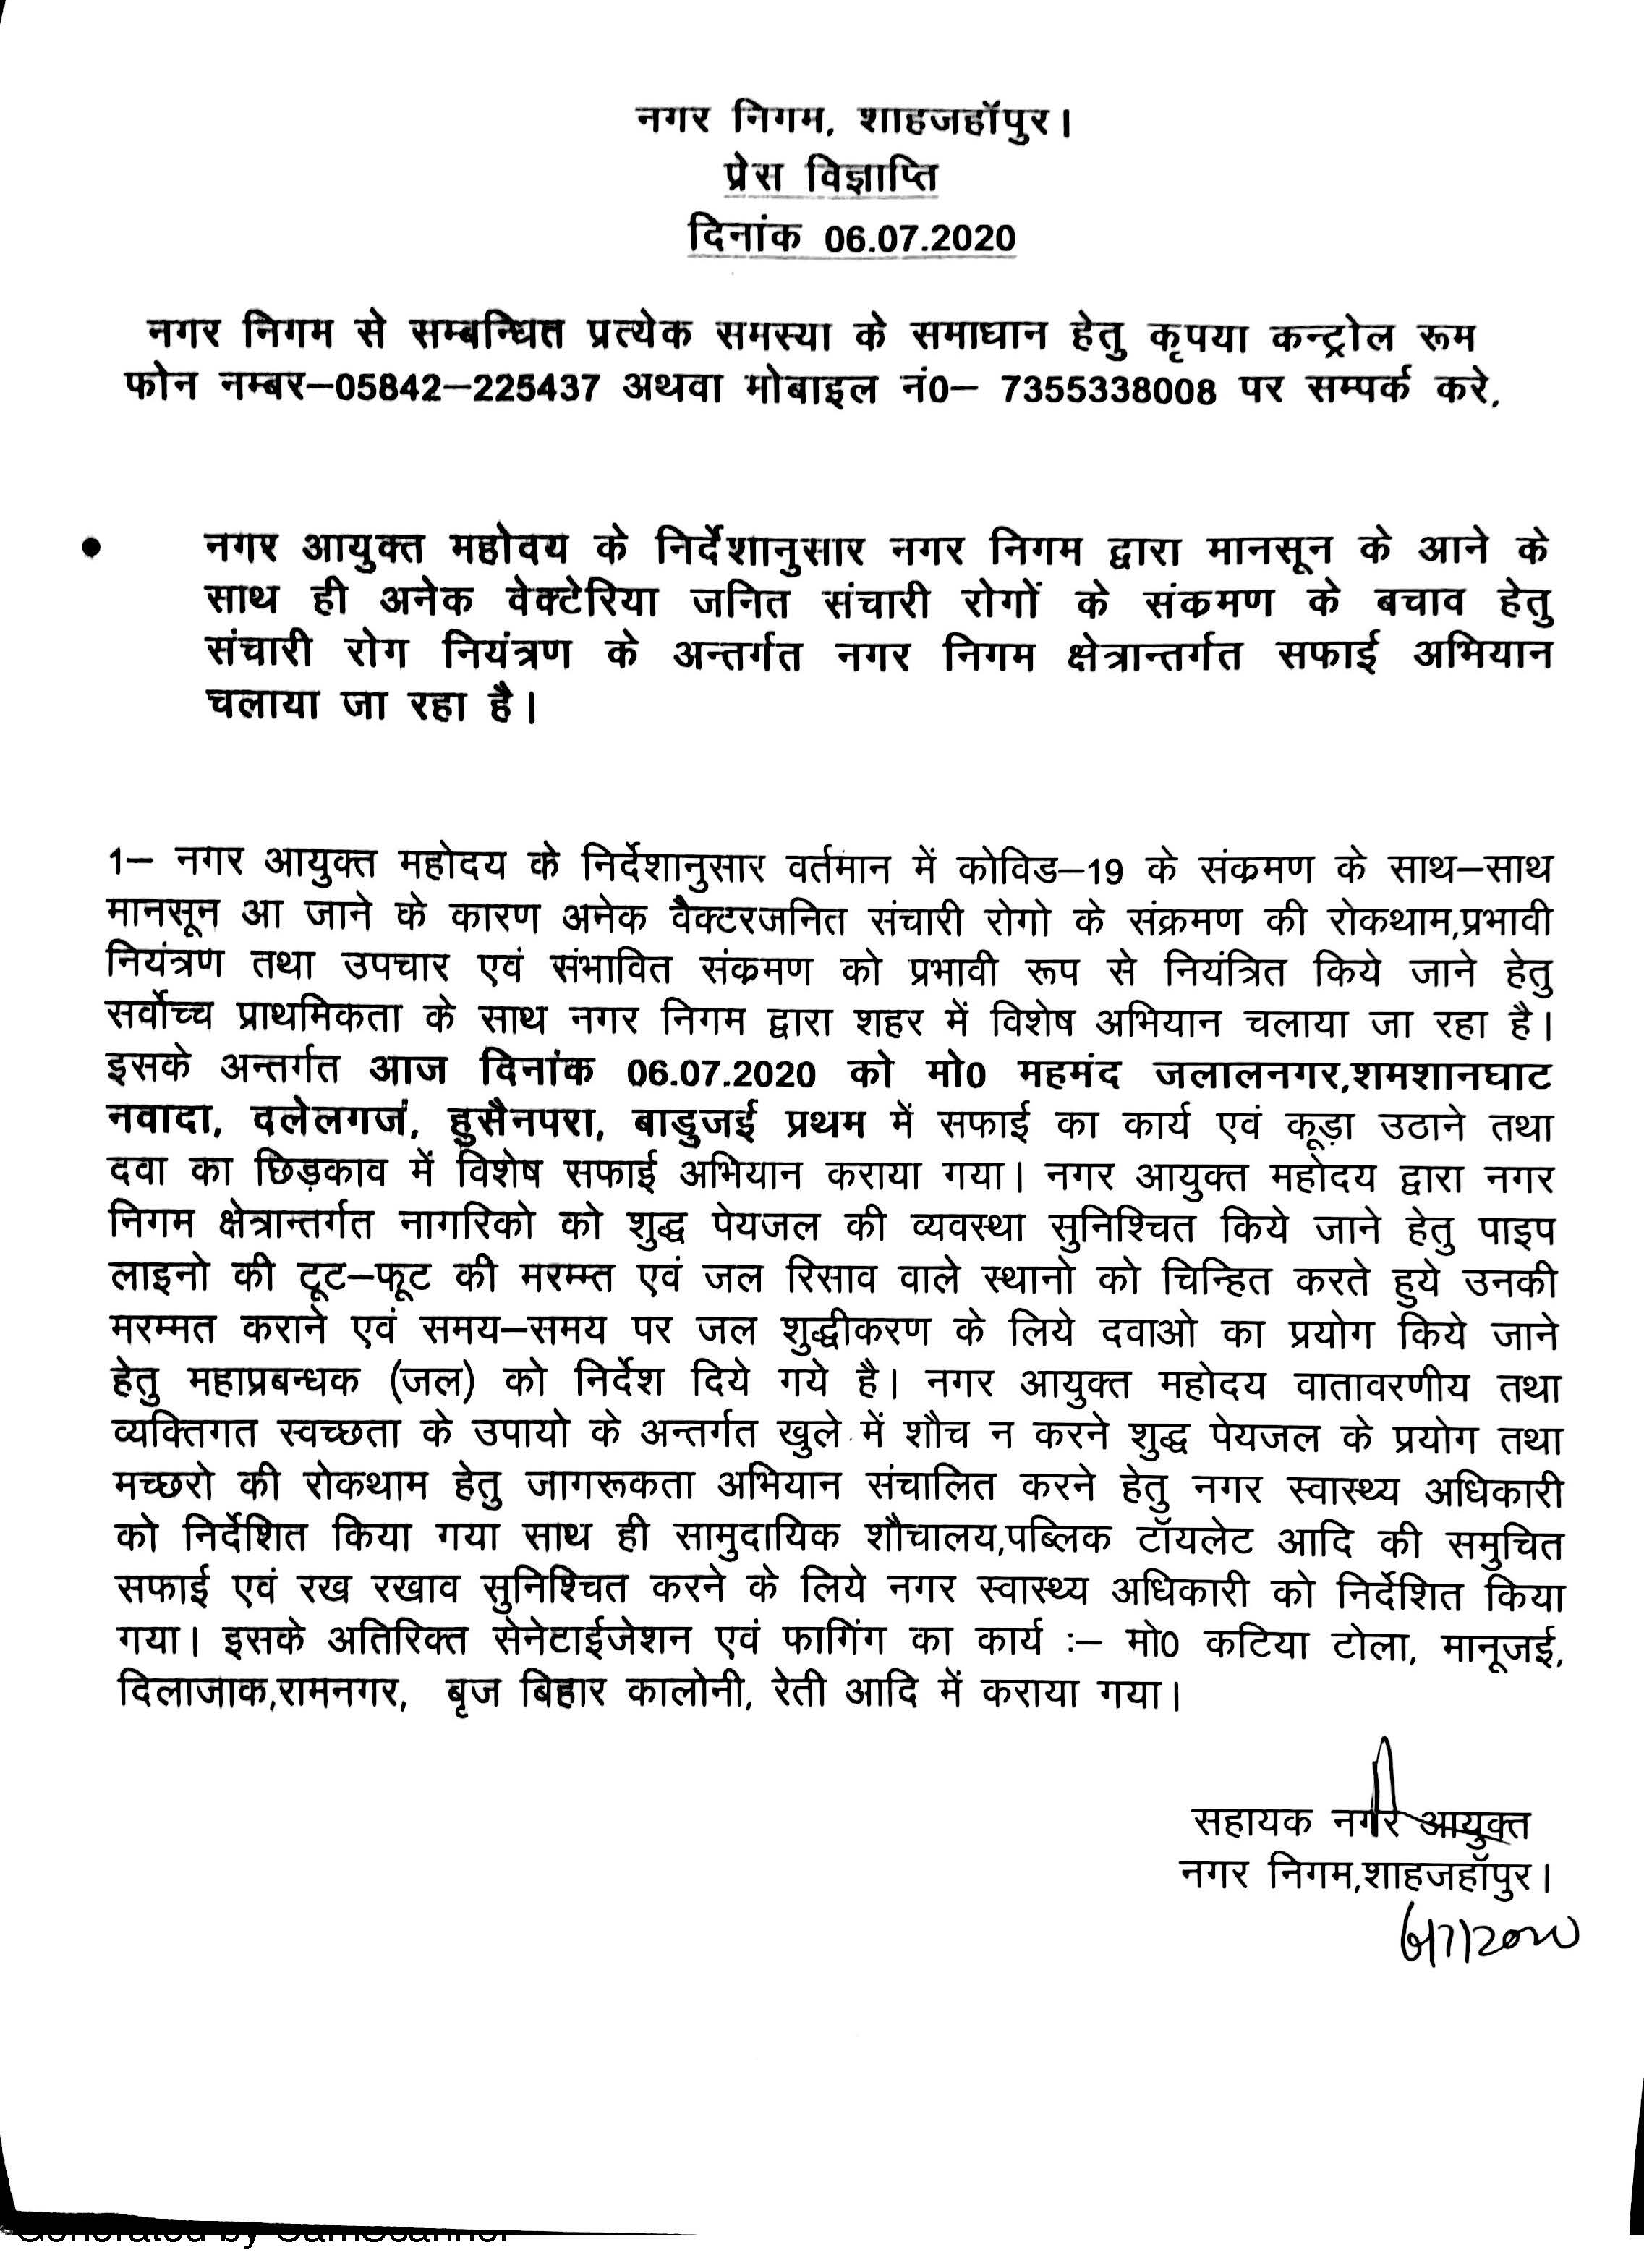 Regarding press release against the cleanliness works carried out in the city on 06.07.2020 according to the guidelines of Municipal Commissioner